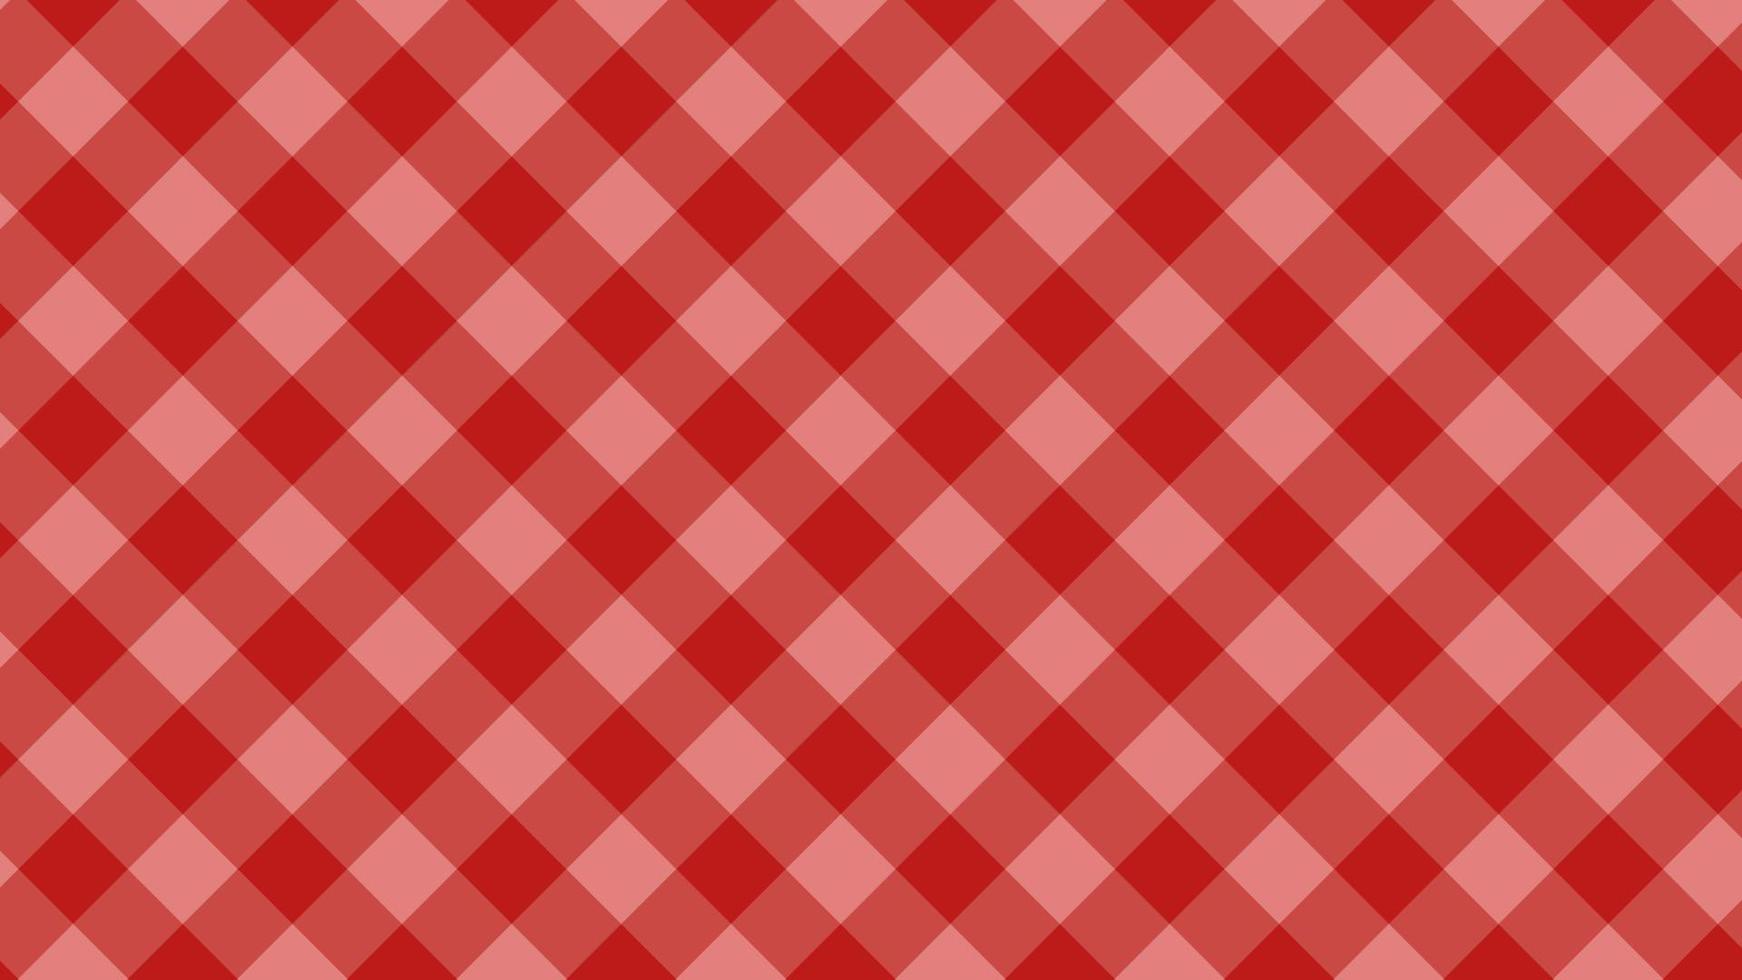 aesthetic red diagonal gingham, checkers, plaid, checkerboard wallpaper illustration, perfect for wallpaper, backdrop, background, banner, cover vector